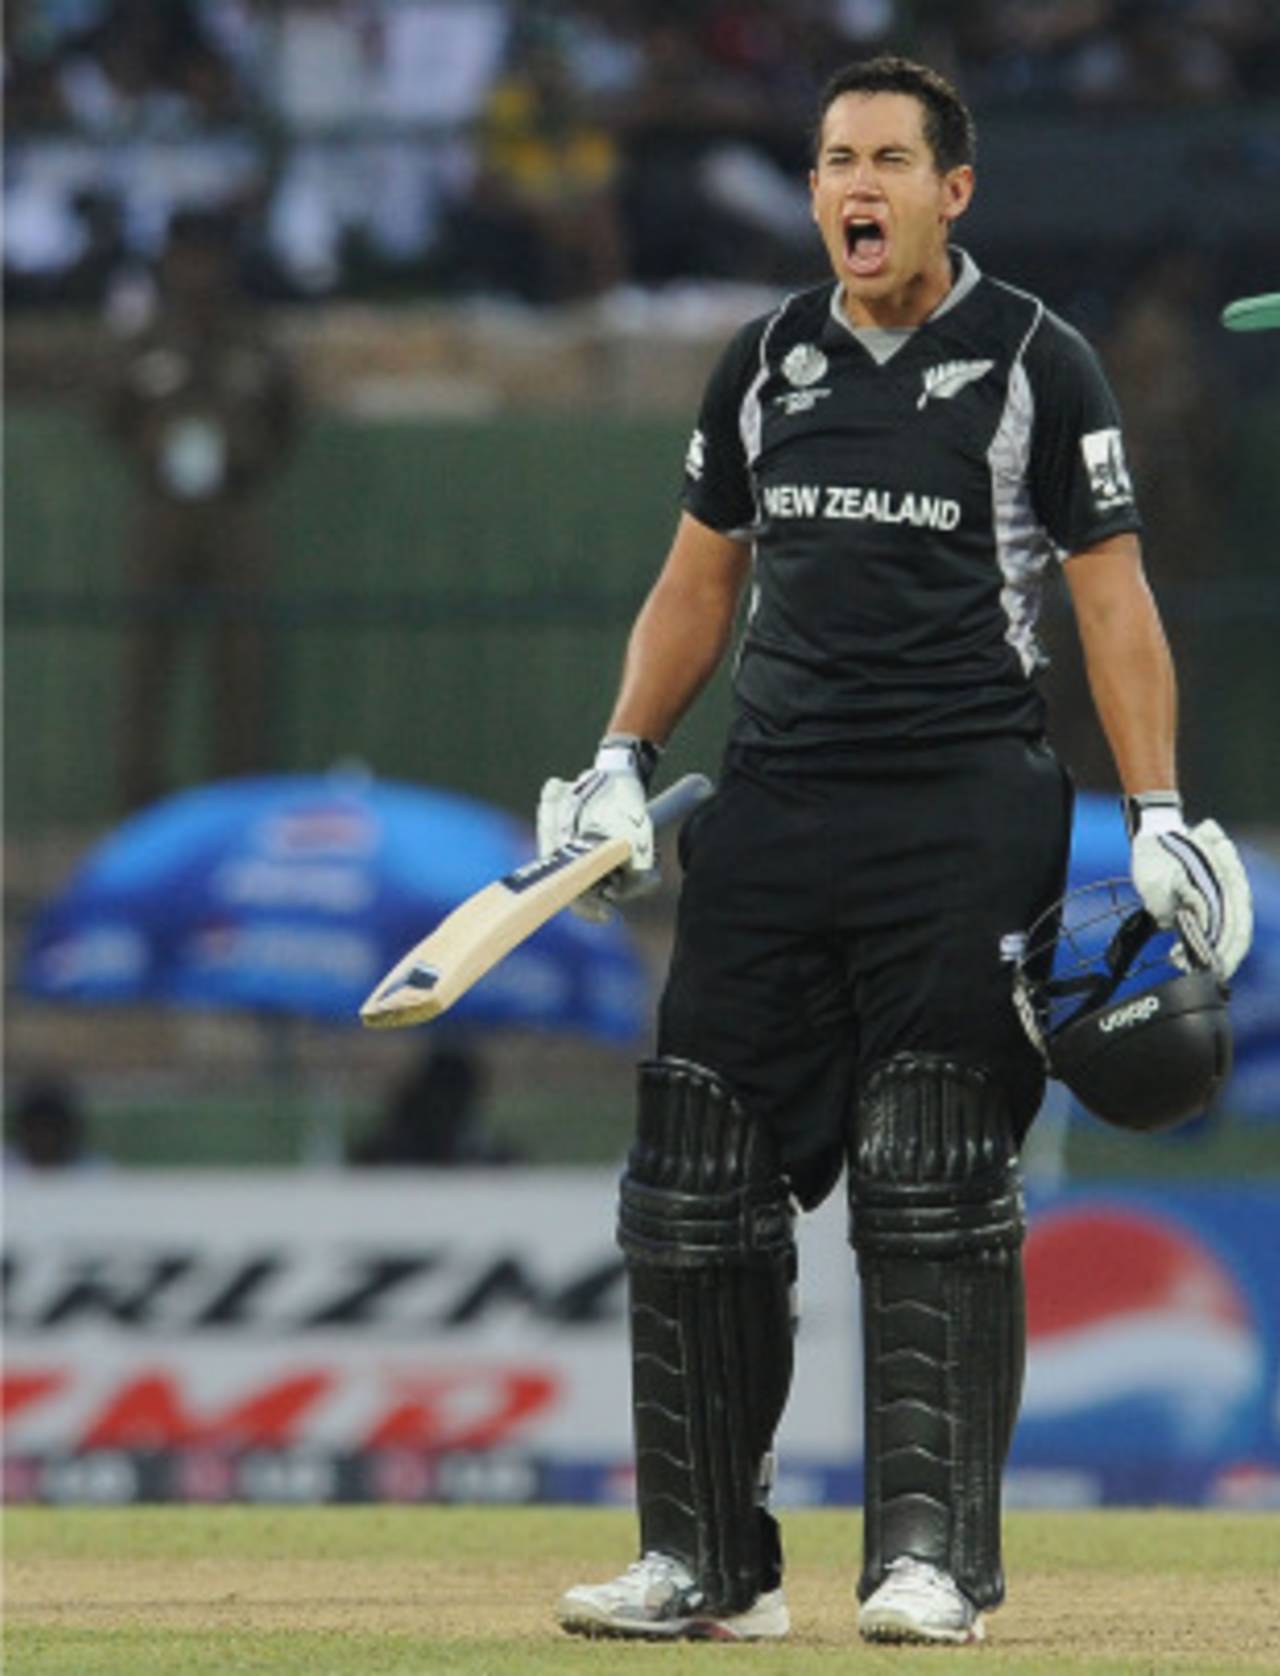 Ross Taylor capitalised on the dropped chances to blaze away to an unbeaten 131&nbsp;&nbsp;&bull;&nbsp;&nbsp;AFP